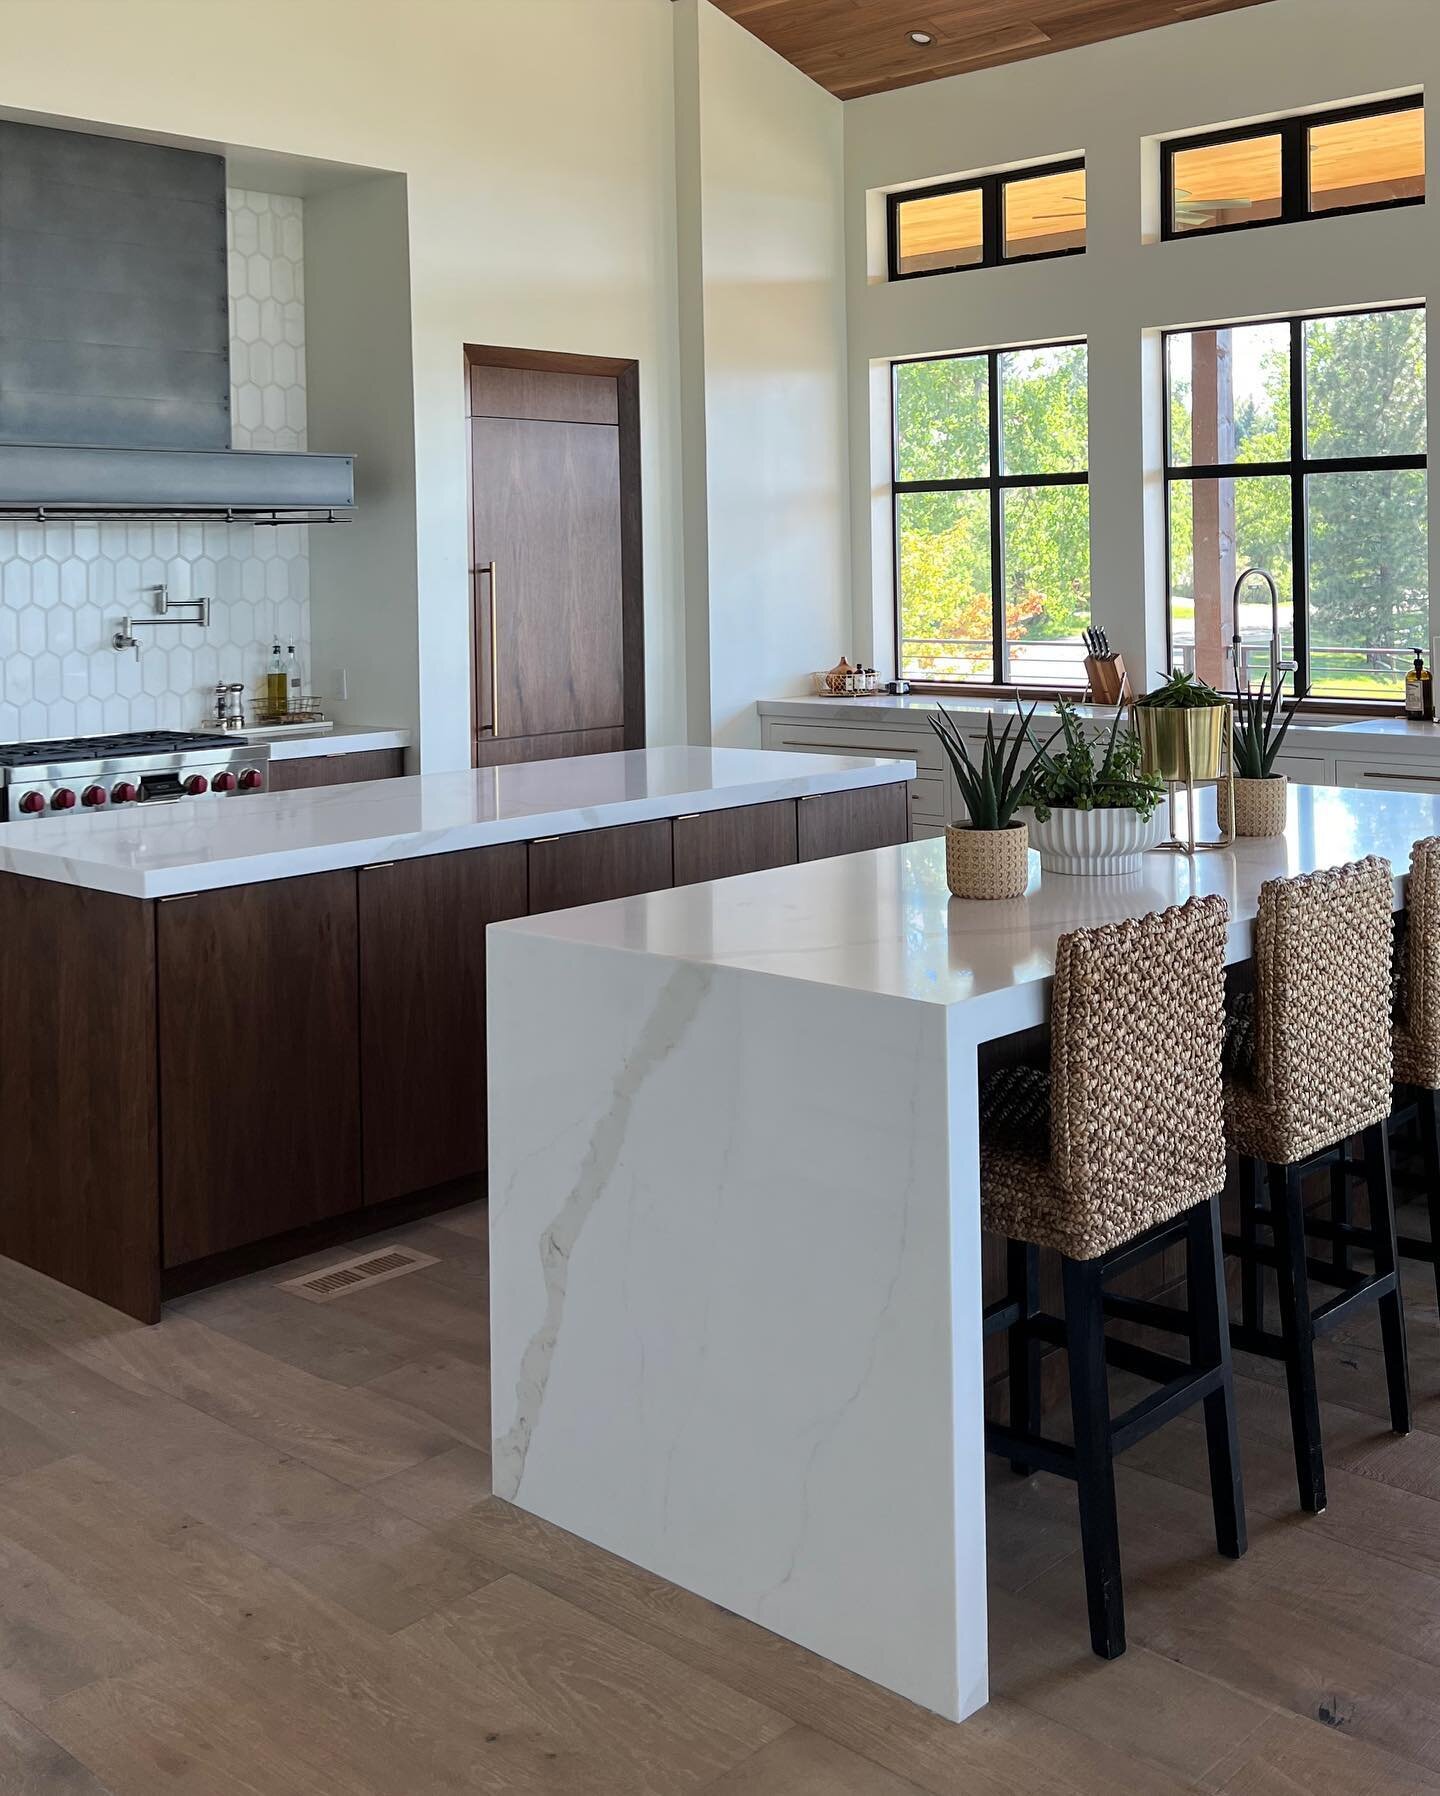 Nestled in the picturesque surroundings of Boulder, Colorado, this kitchen exudes a harmonious blend of rustic charm and elegance. The rich walnut cabinetry, with its deep, natural grain, stands as a focal point in the design. #walnutcabinets #boulde